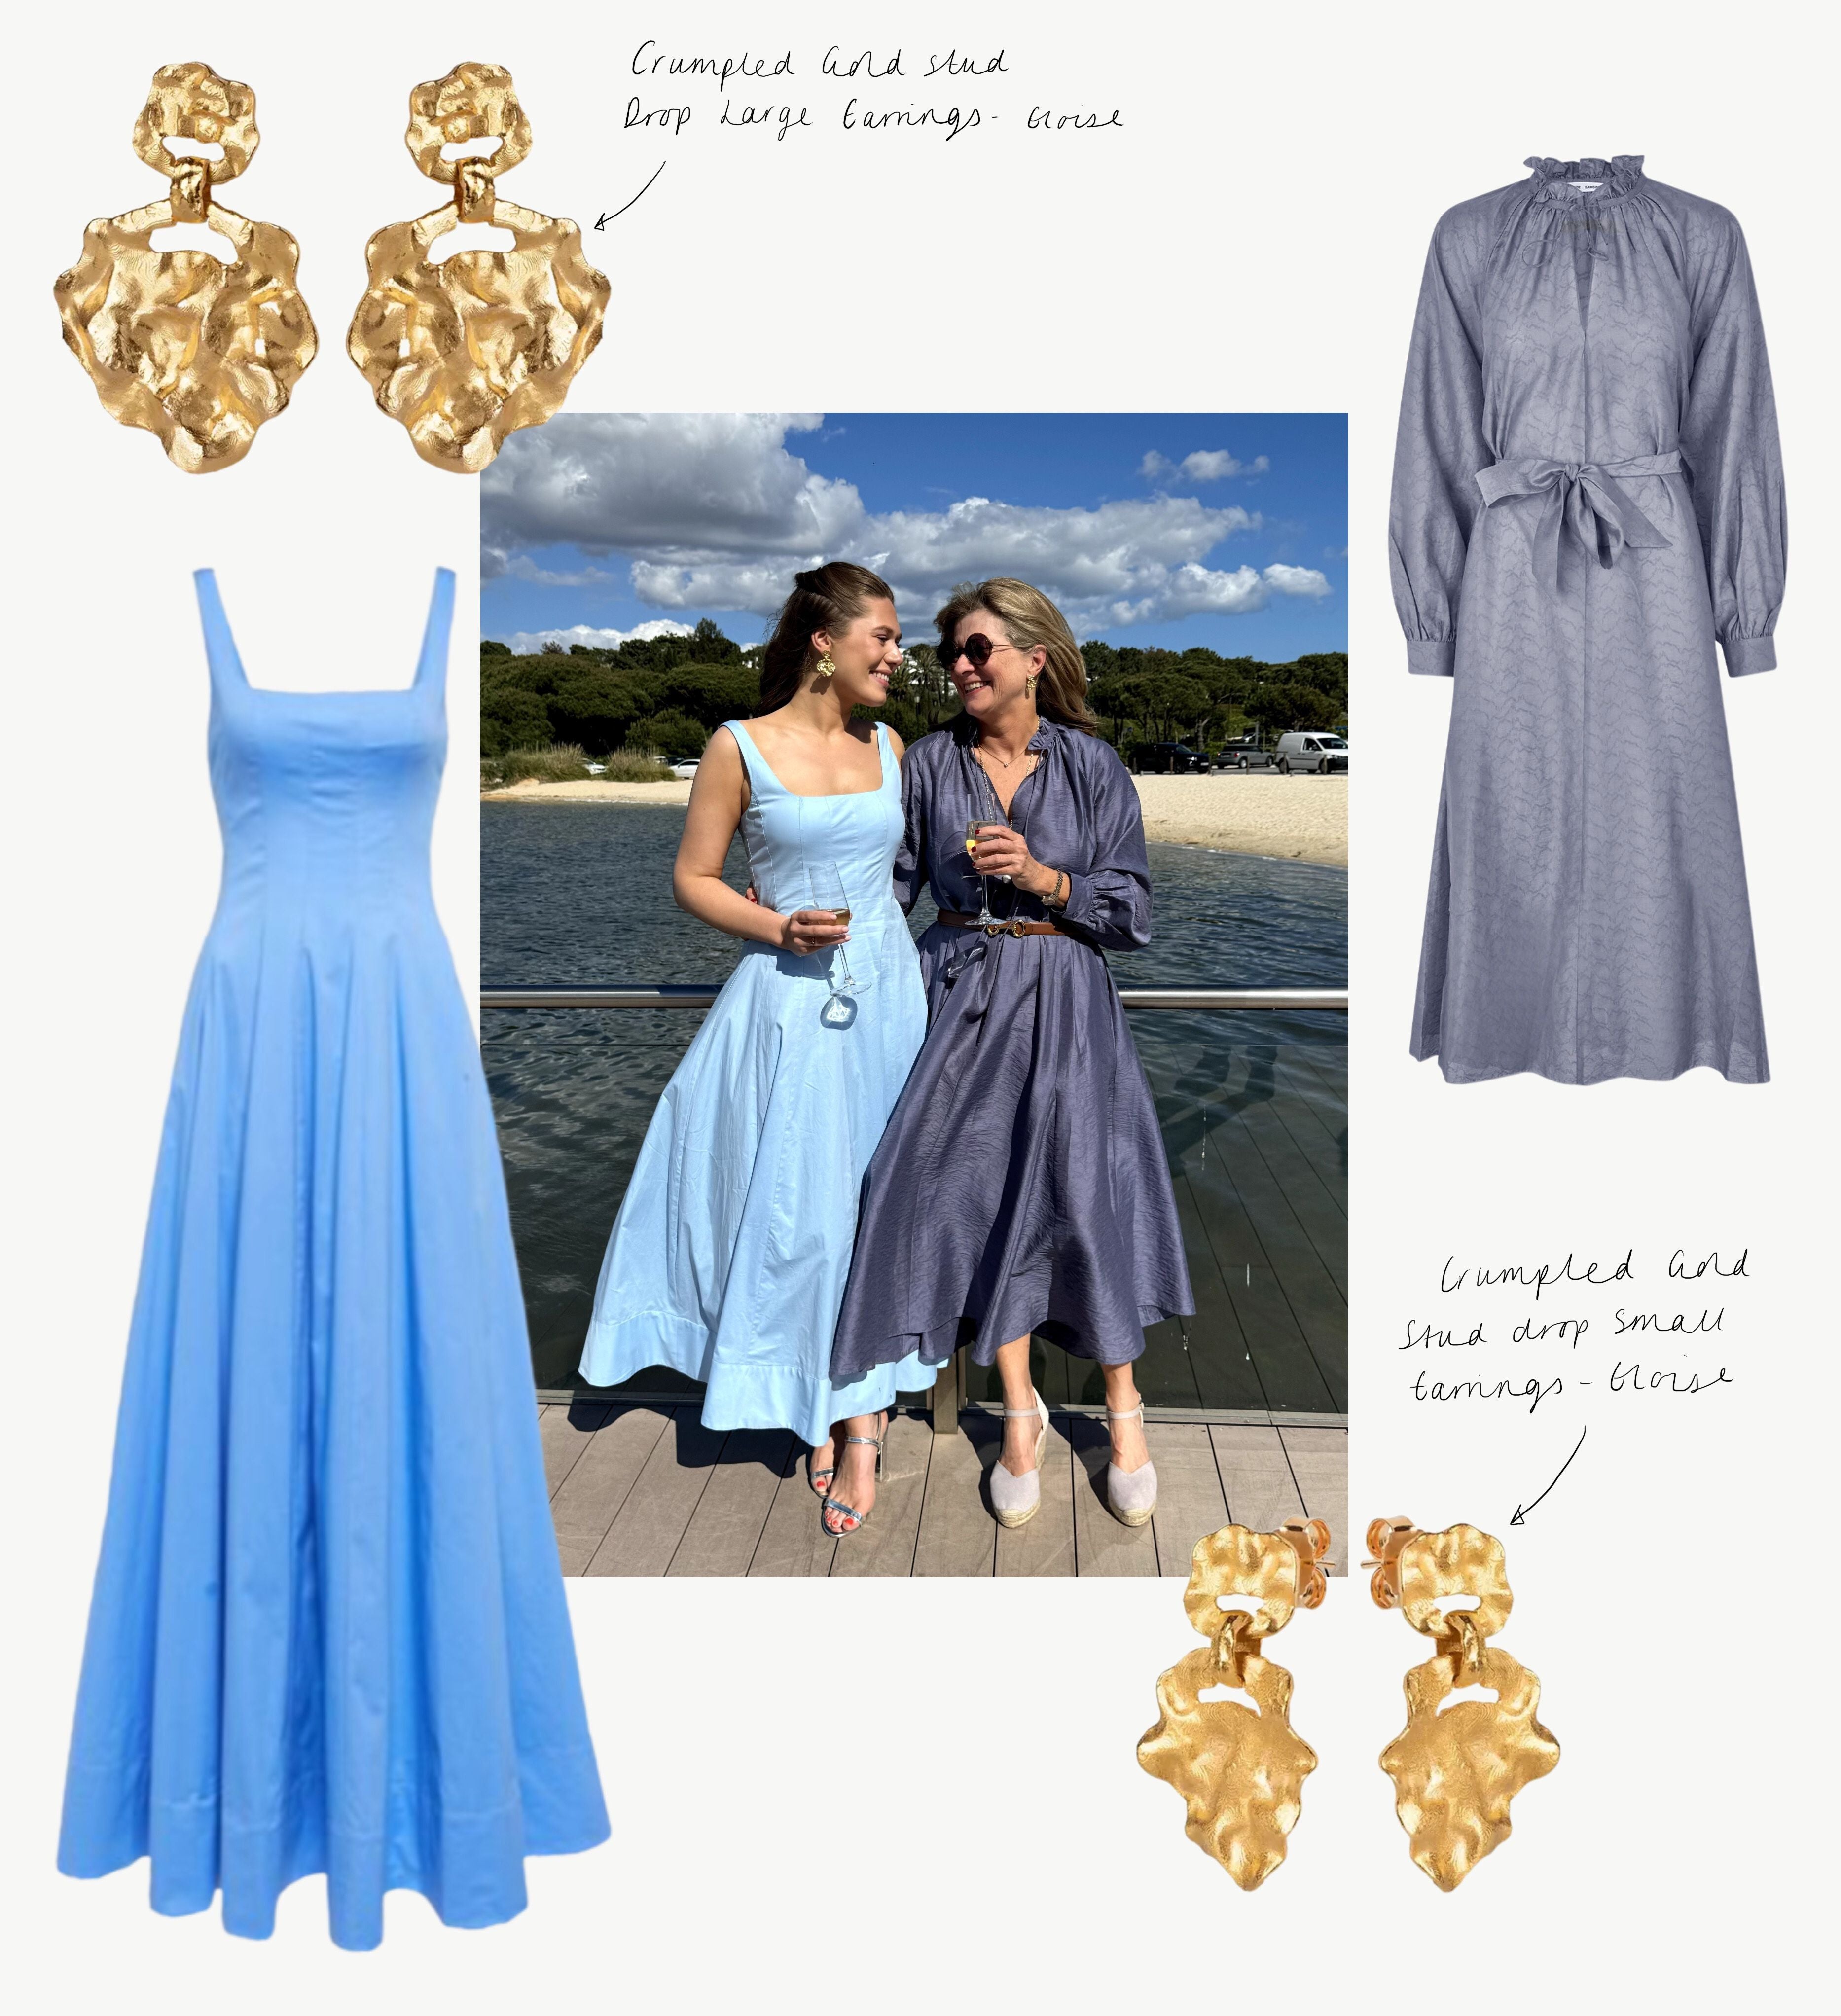 Shop The Look: Weddings by the Sea